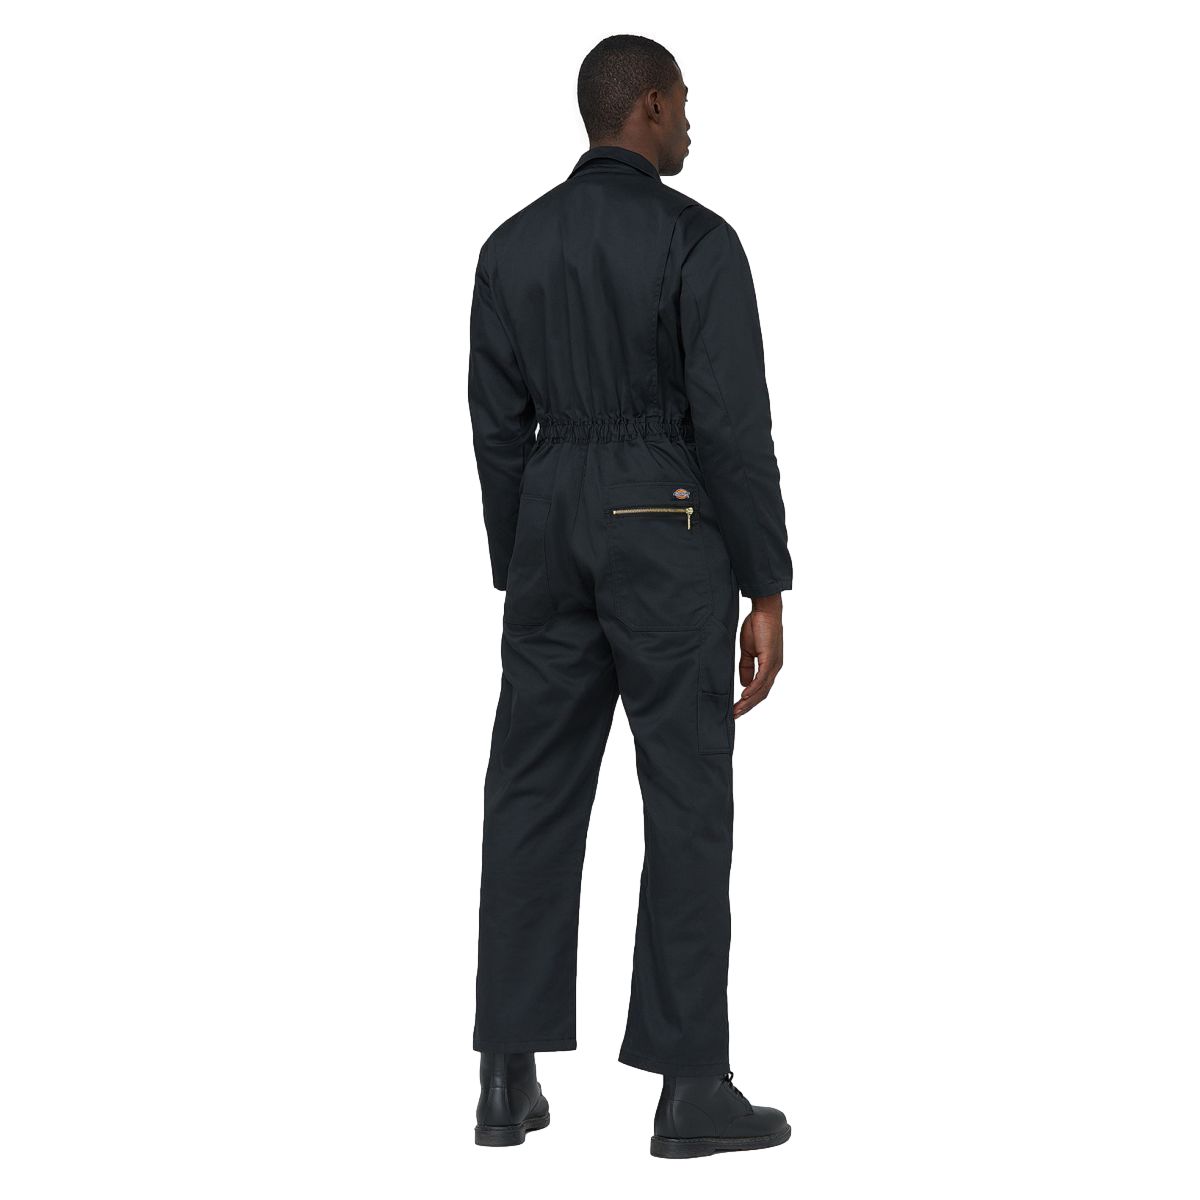 Combinaison Redhawk Coverhall Noir - Dickies - Taille M 4